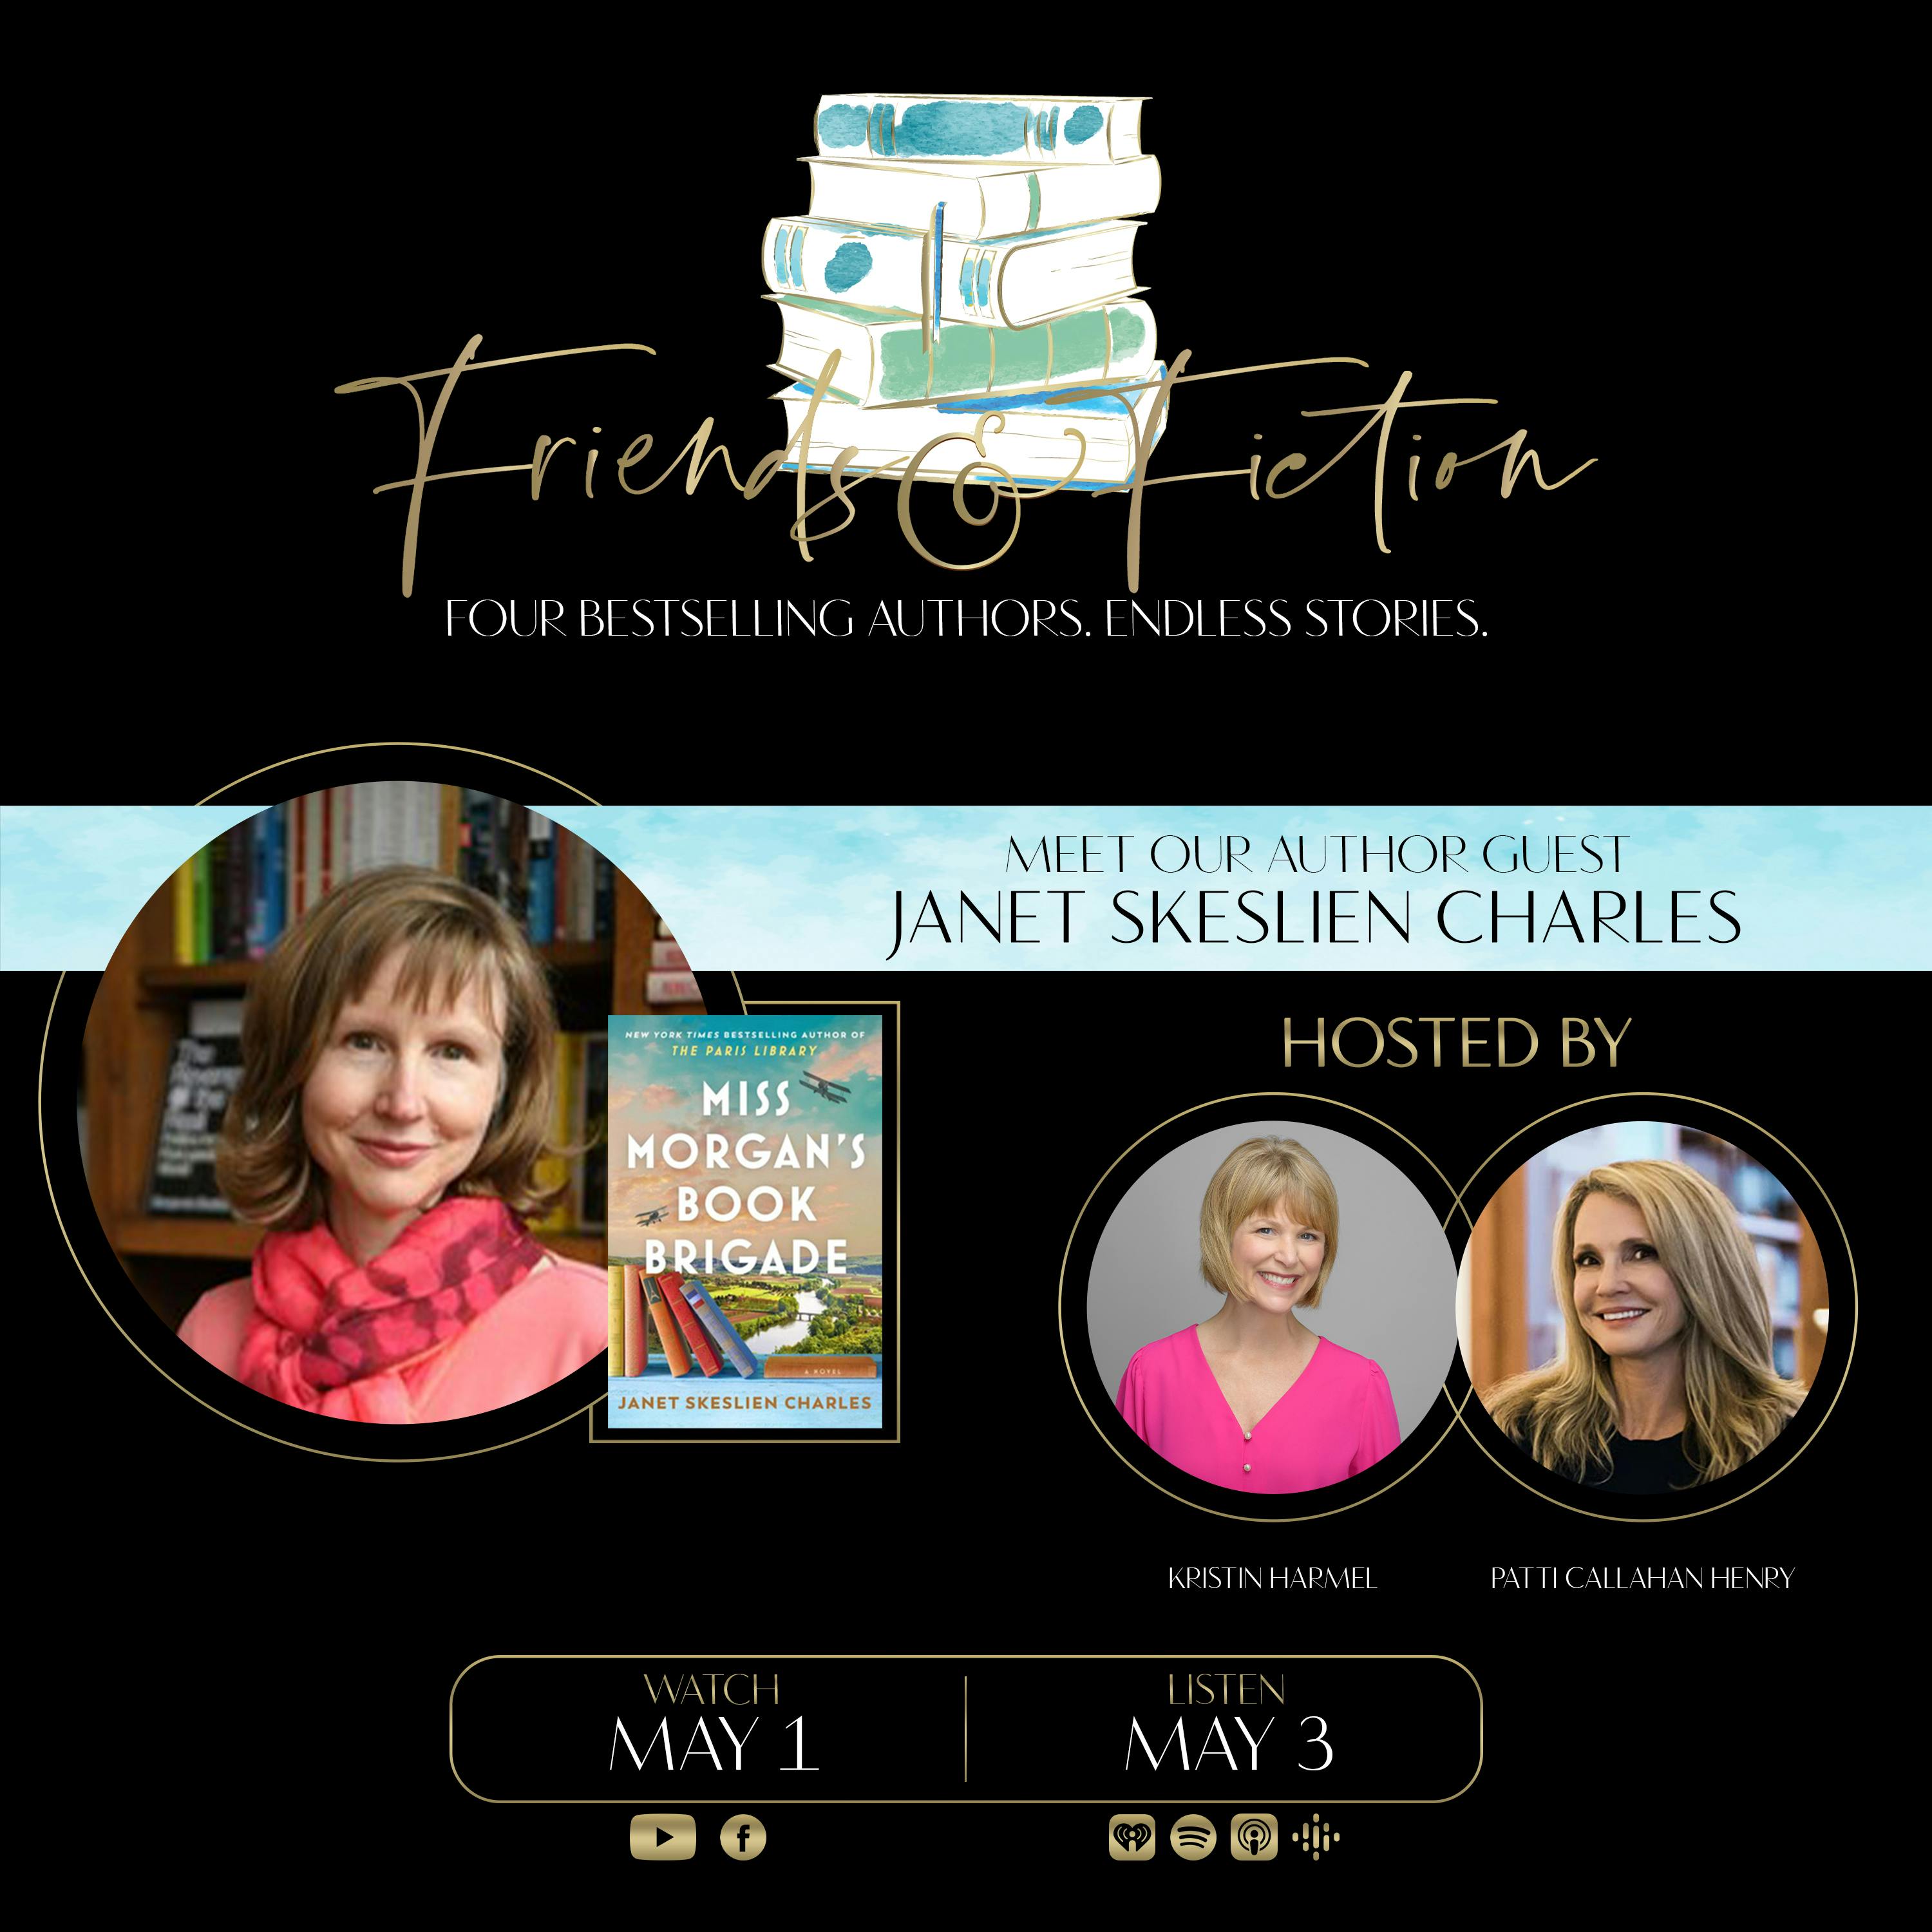 Friends & Fiction with Janet Skeslien Charles